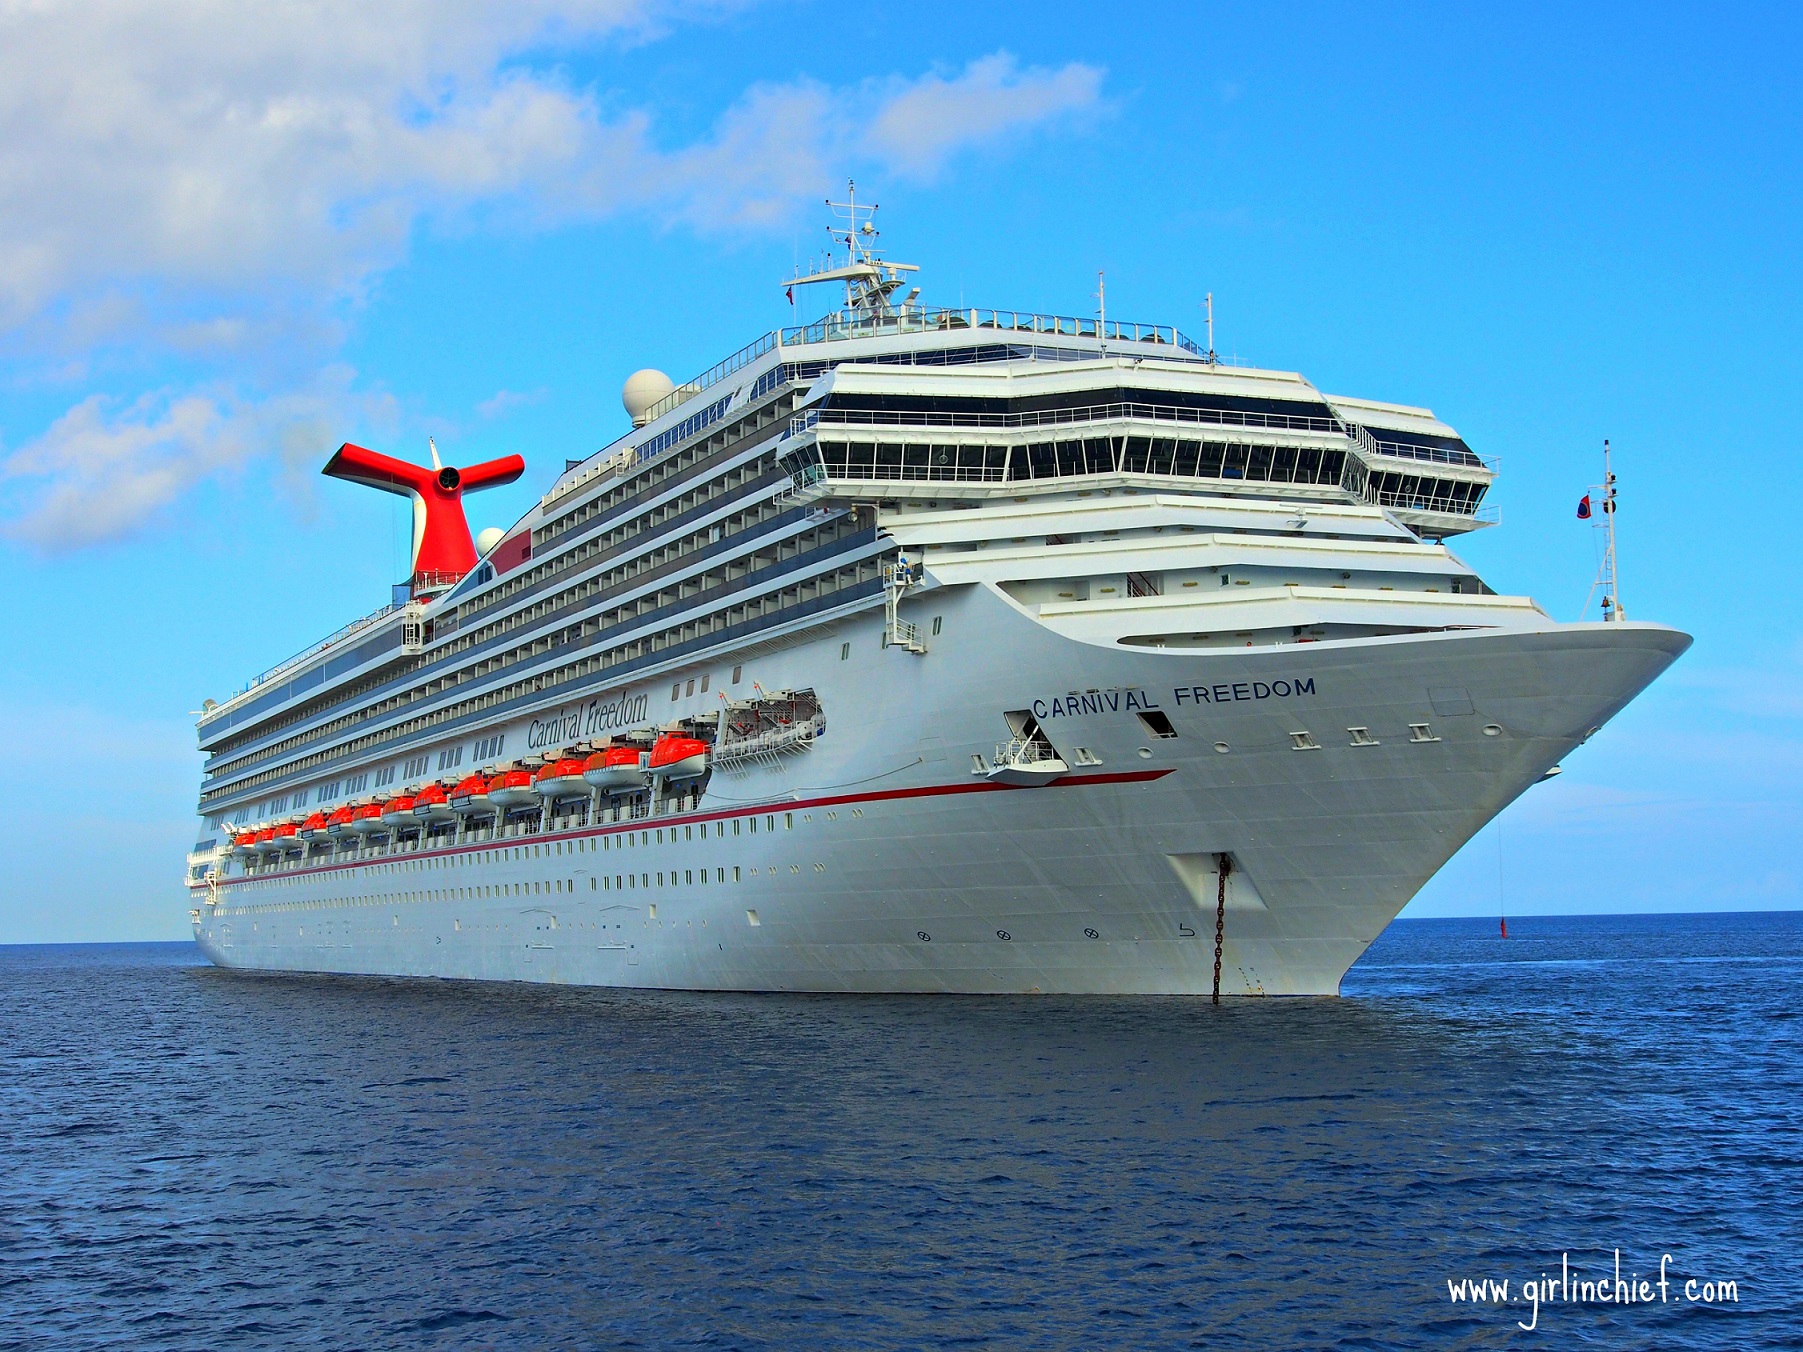 Cruise Series | Cruising the Caribbean on Carnival Freedom